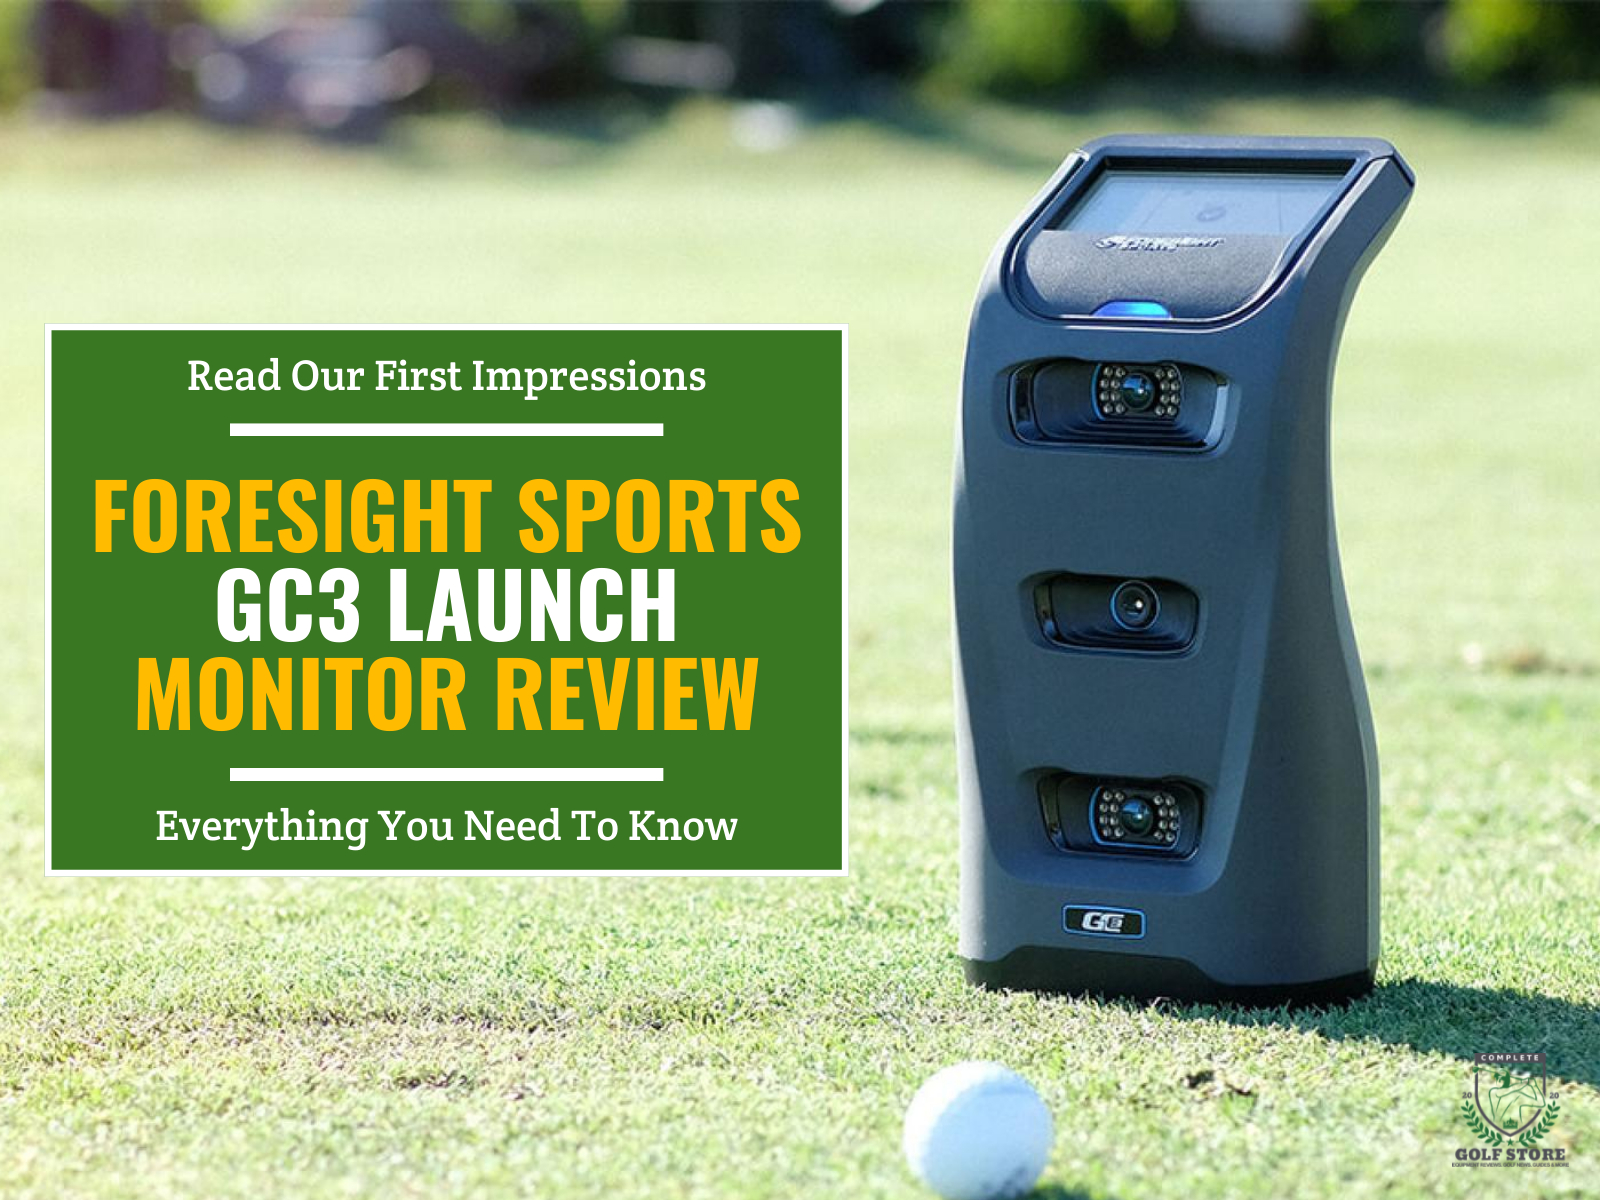 Foresight gc3 launch monitor and a golf ball on the golf course. Green textbox on the left contains the text 